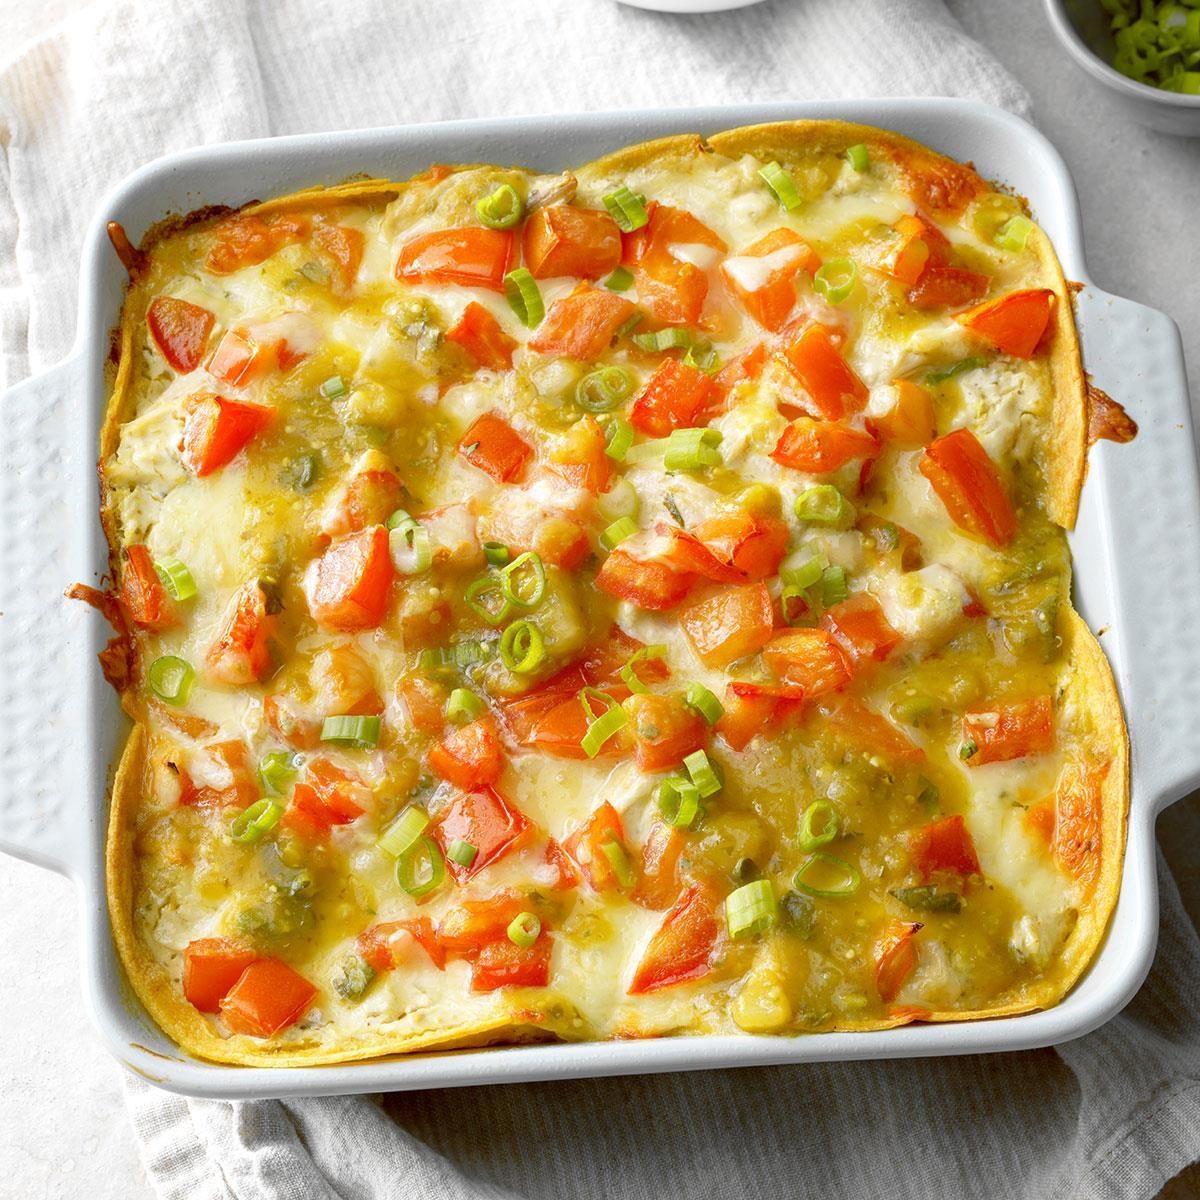 19 Cheap Casseroles That Are Packed with Healthy Ingredients